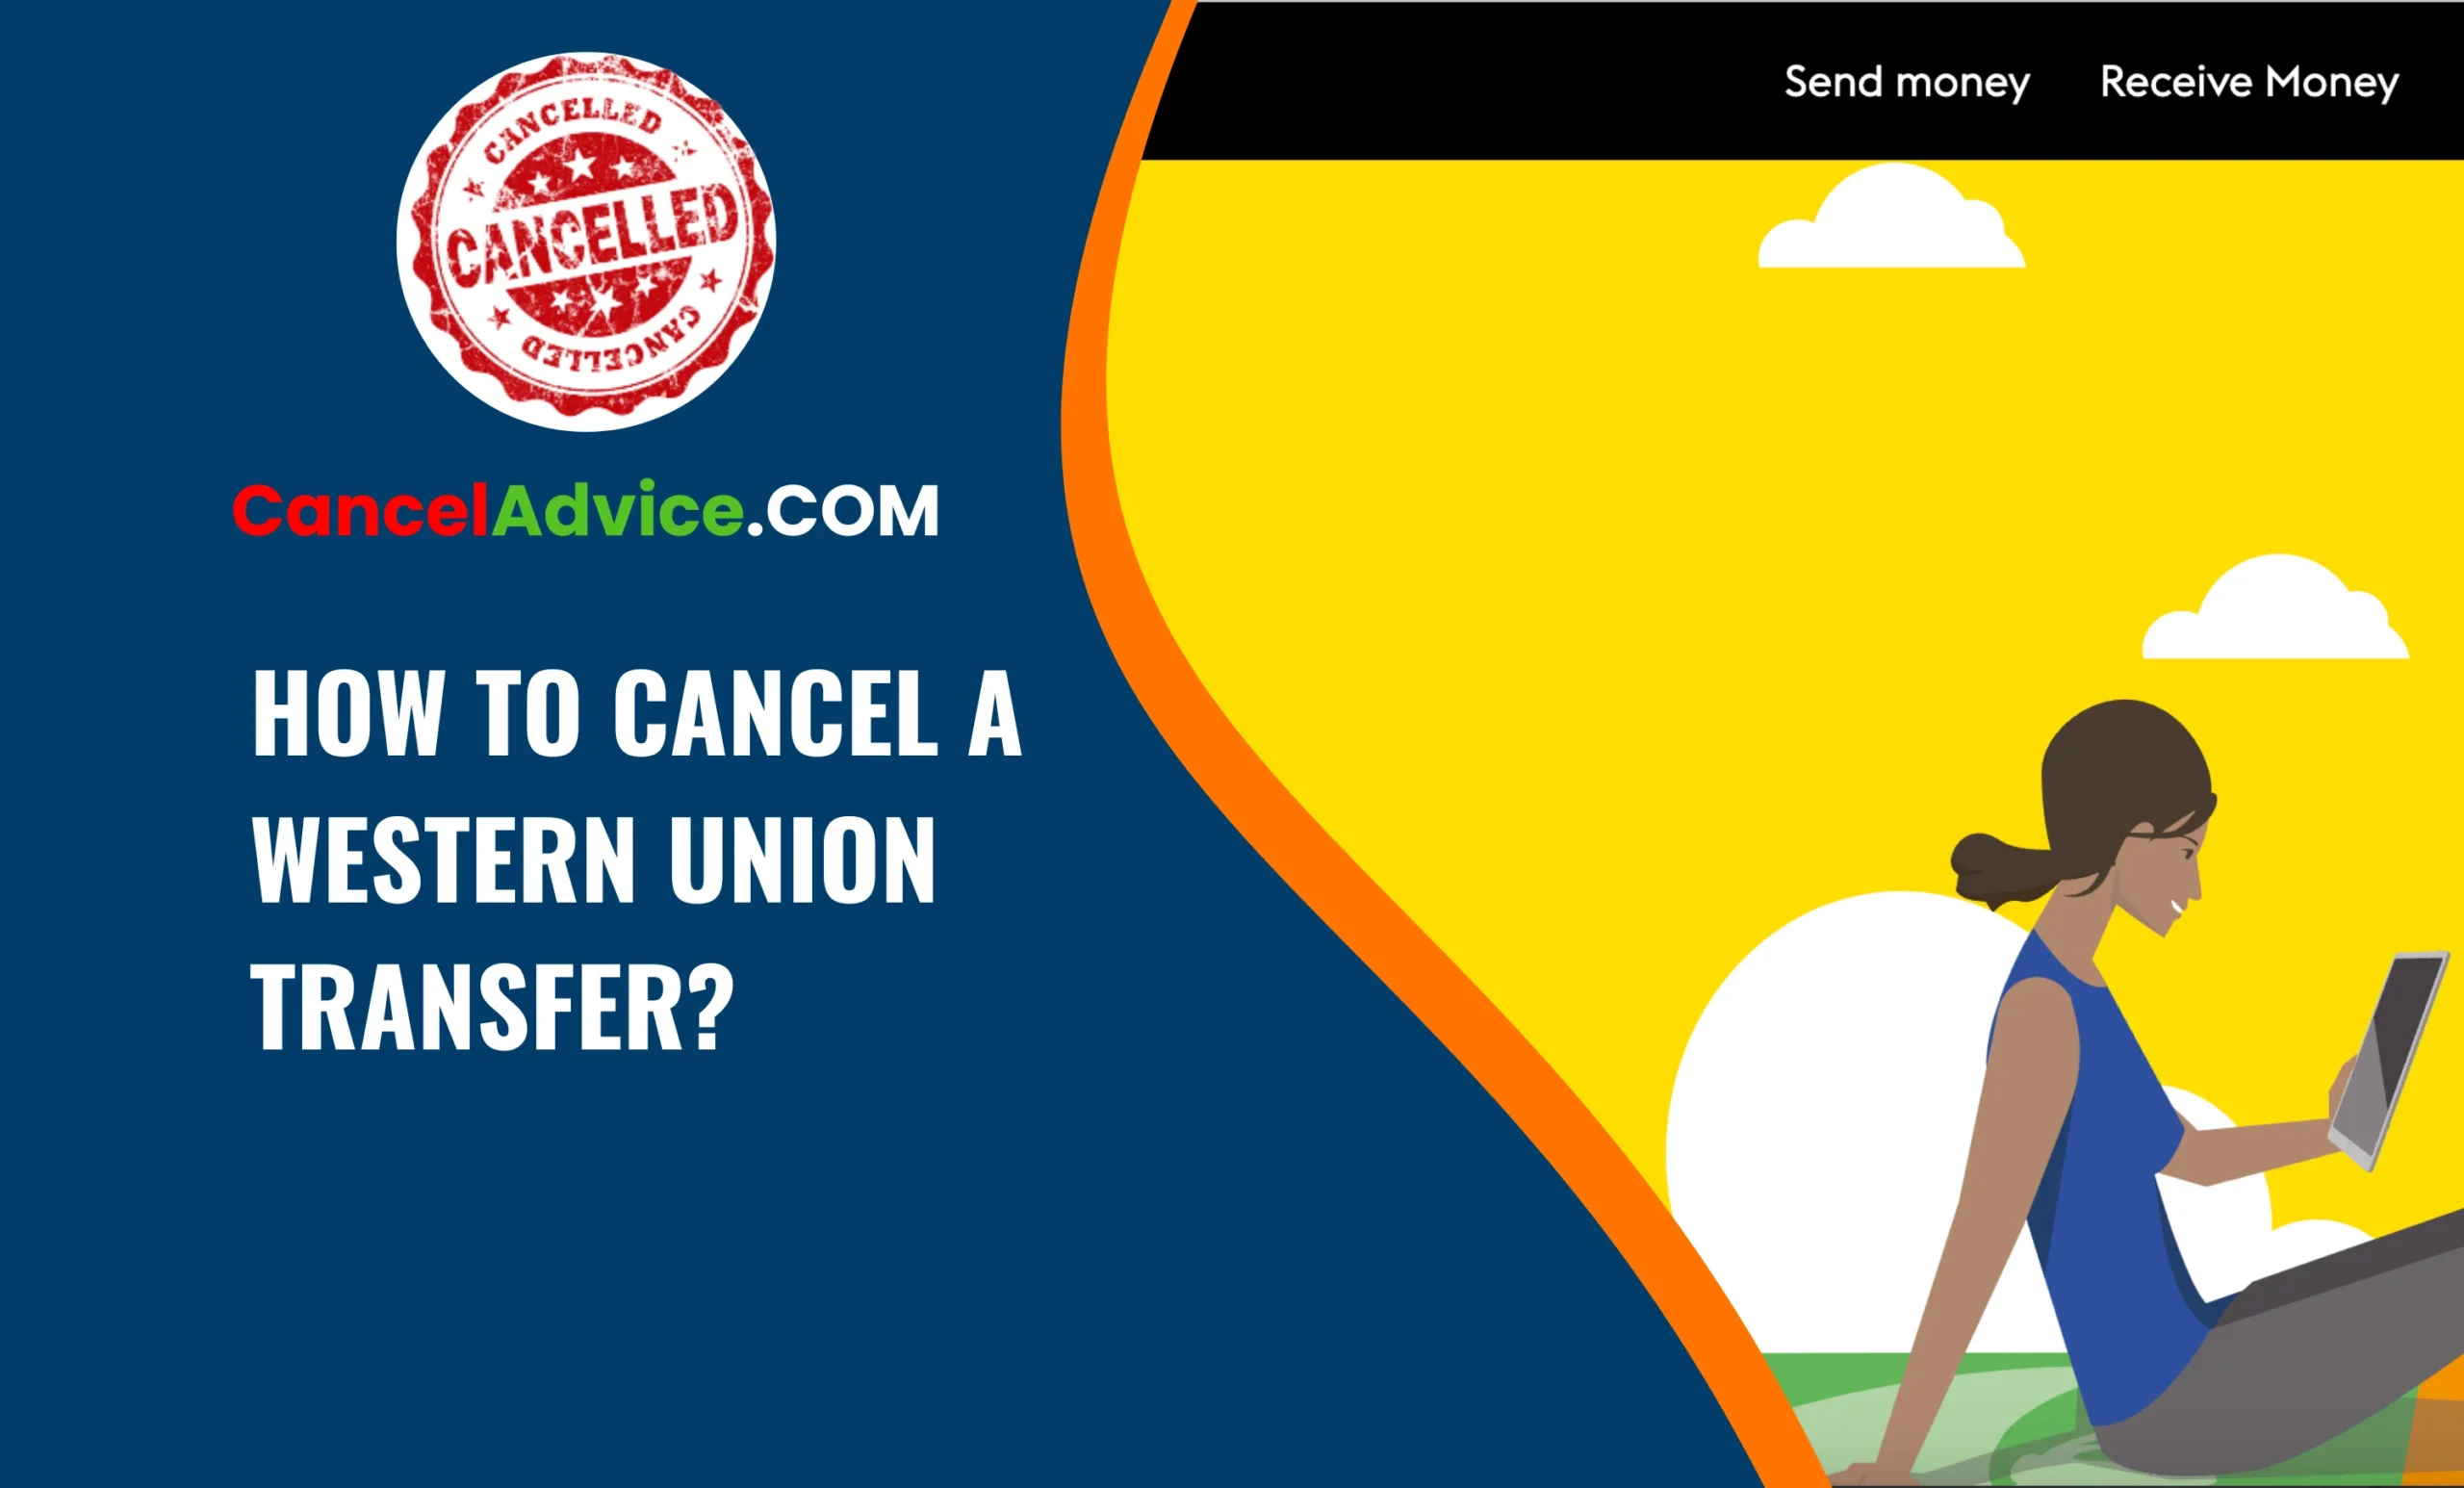 How To Cancel A Western Union Transfer